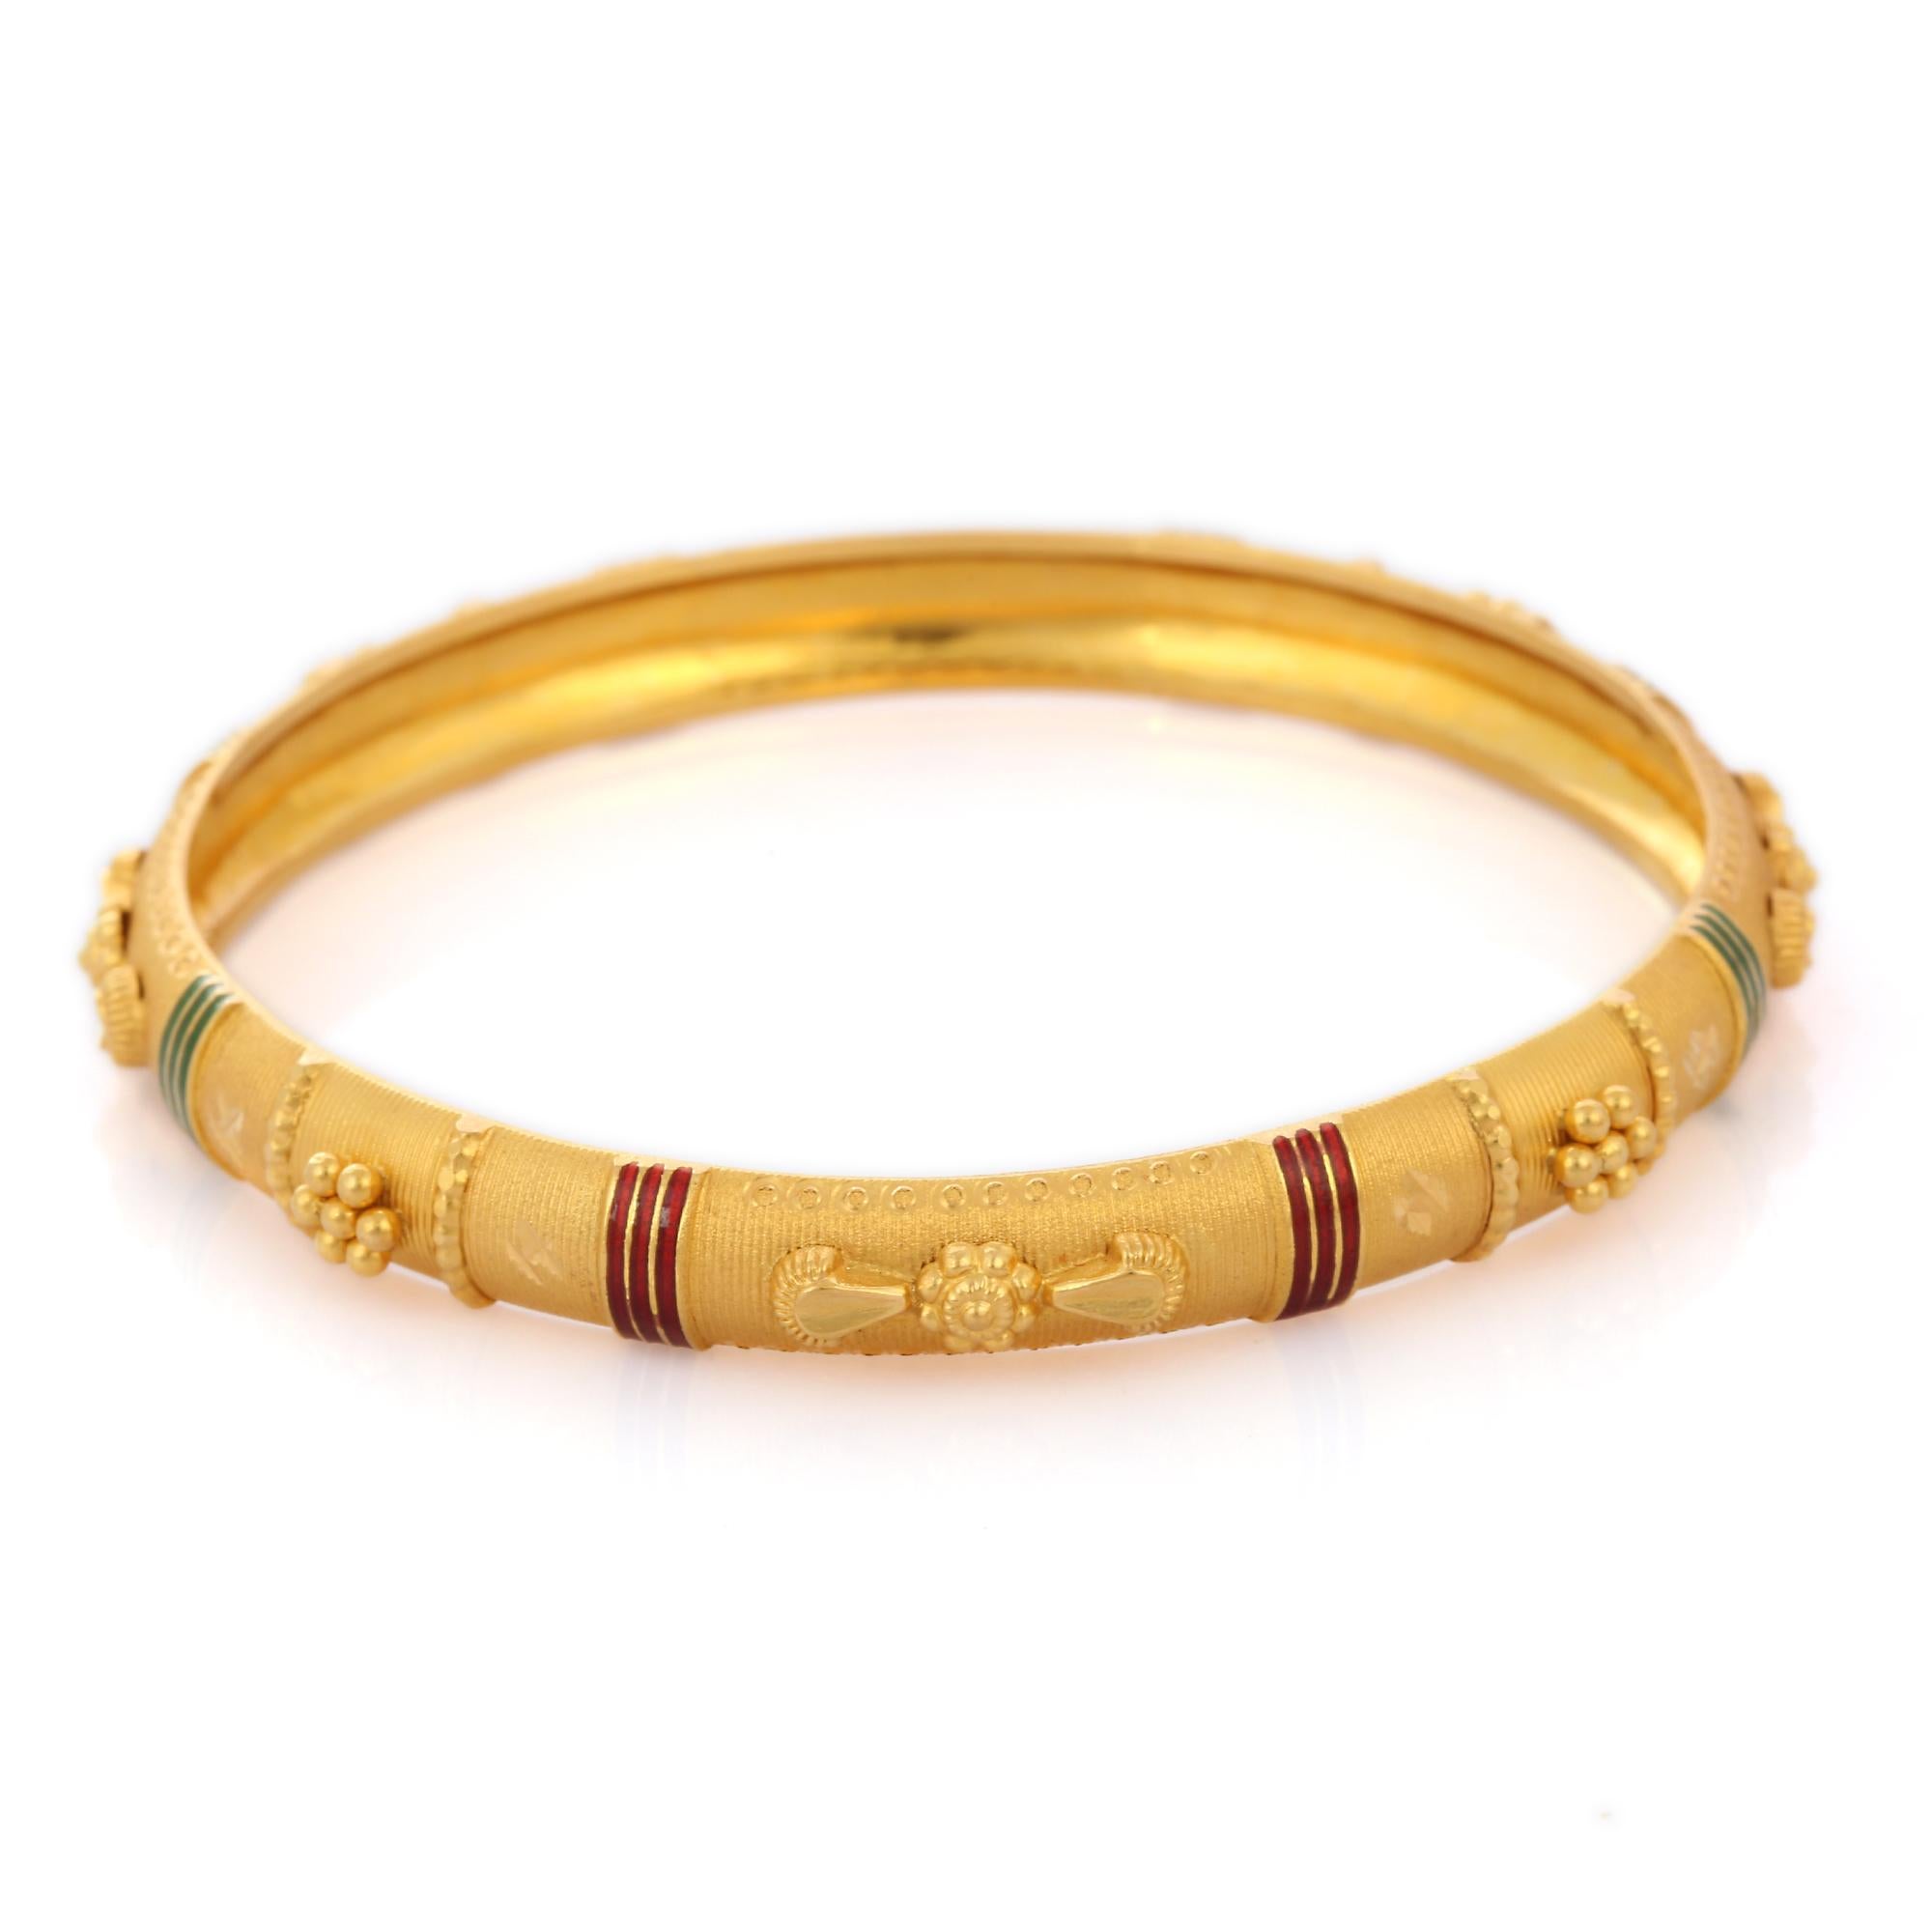 Metal Engraved Bangle in 18K Gold. It’s a great jewelry ornament to wear on occasions and at the same time works as a wonderful gift for your loved ones. These lovely statement pieces are perfect generation jewelry to pass on.
Bangles feel